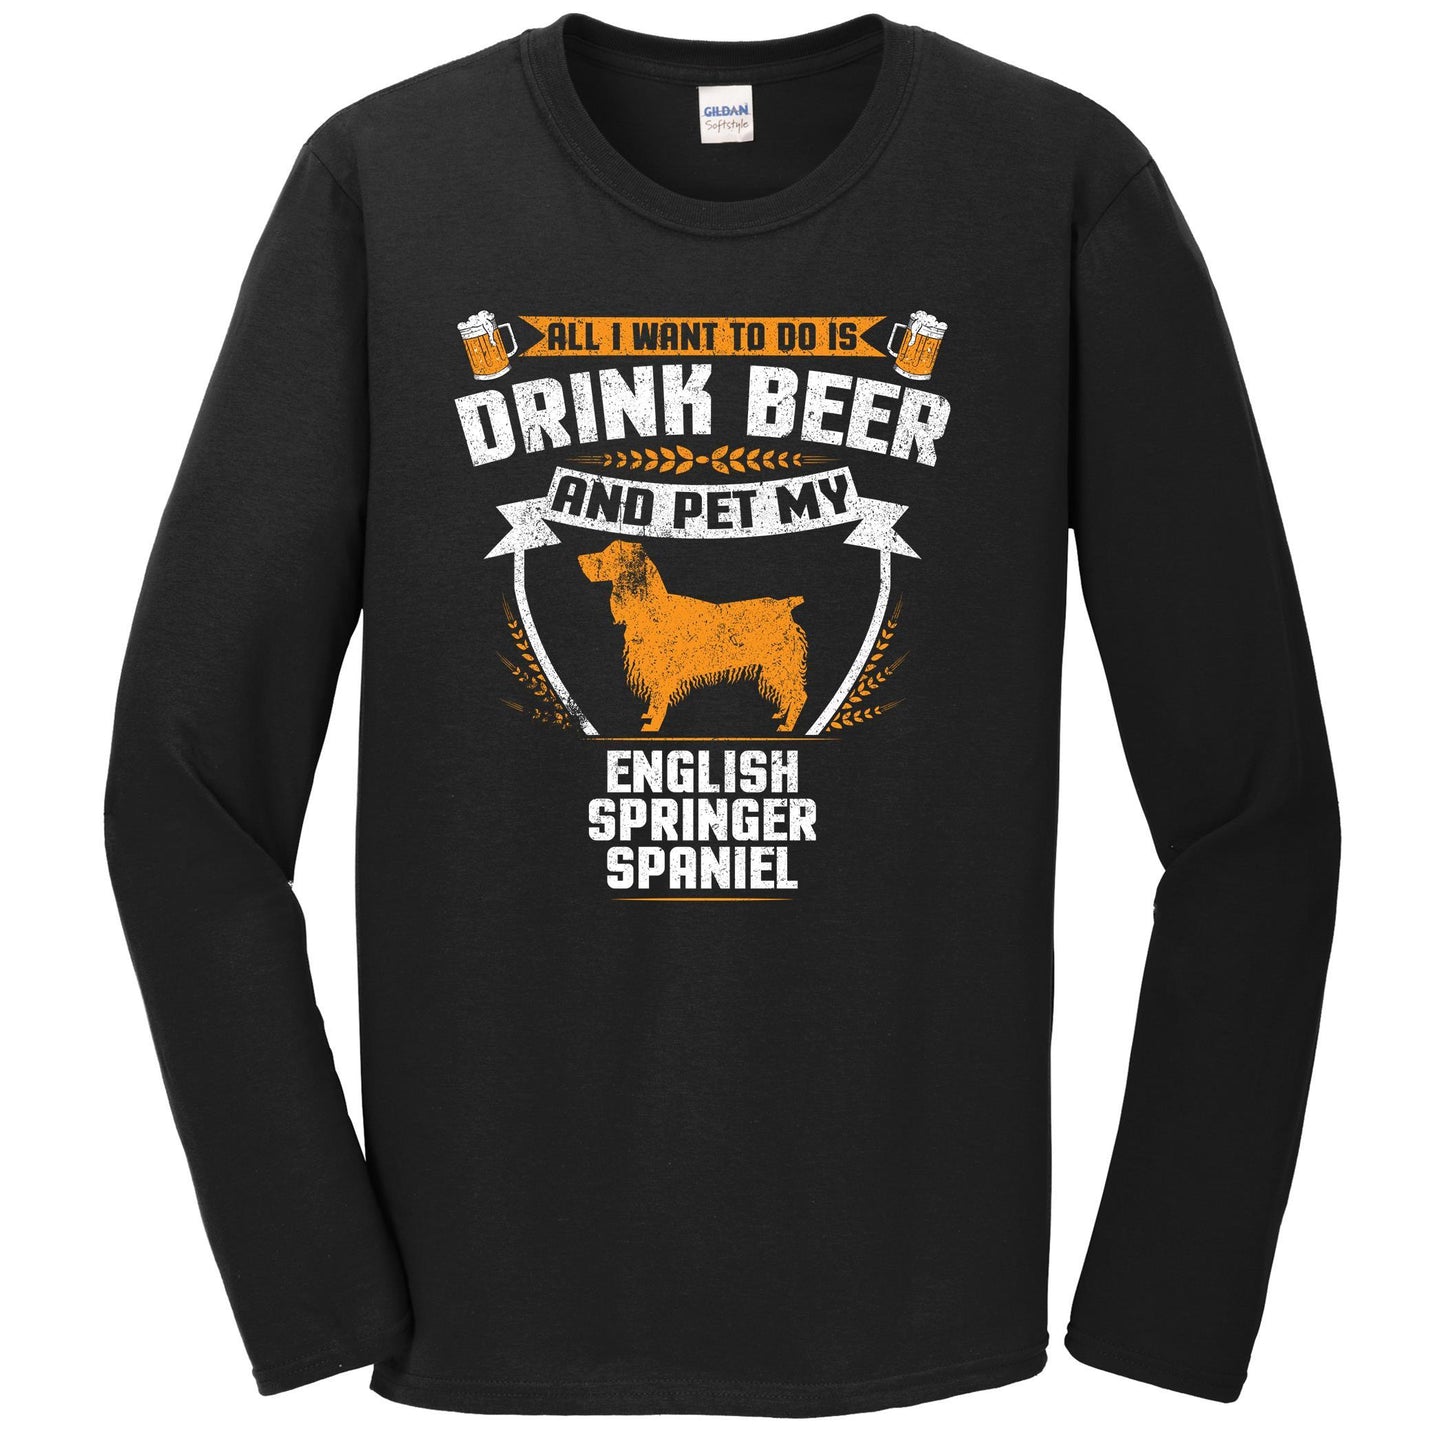 All I Want To Do Is Drink Beer And Pet My English Springer Spaniel Funny Dog Owner Long Sleeve Shirt